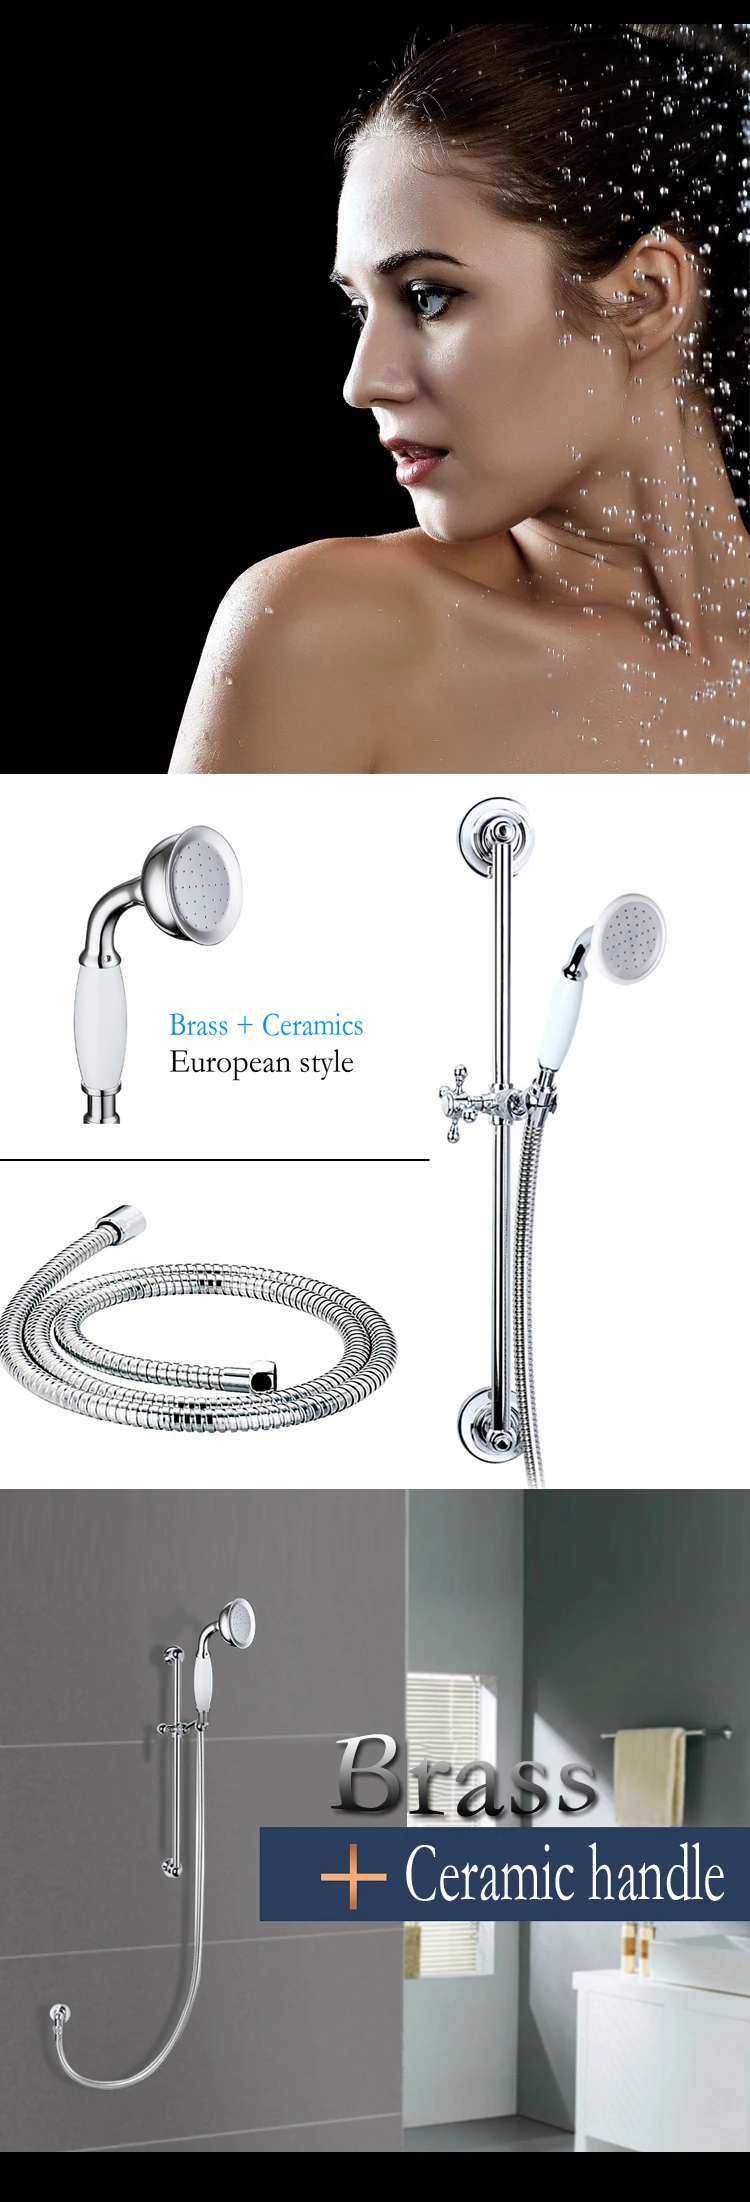 European style Hot sale Brass slide rail set with handshower and 1.5m flexible hose for shower